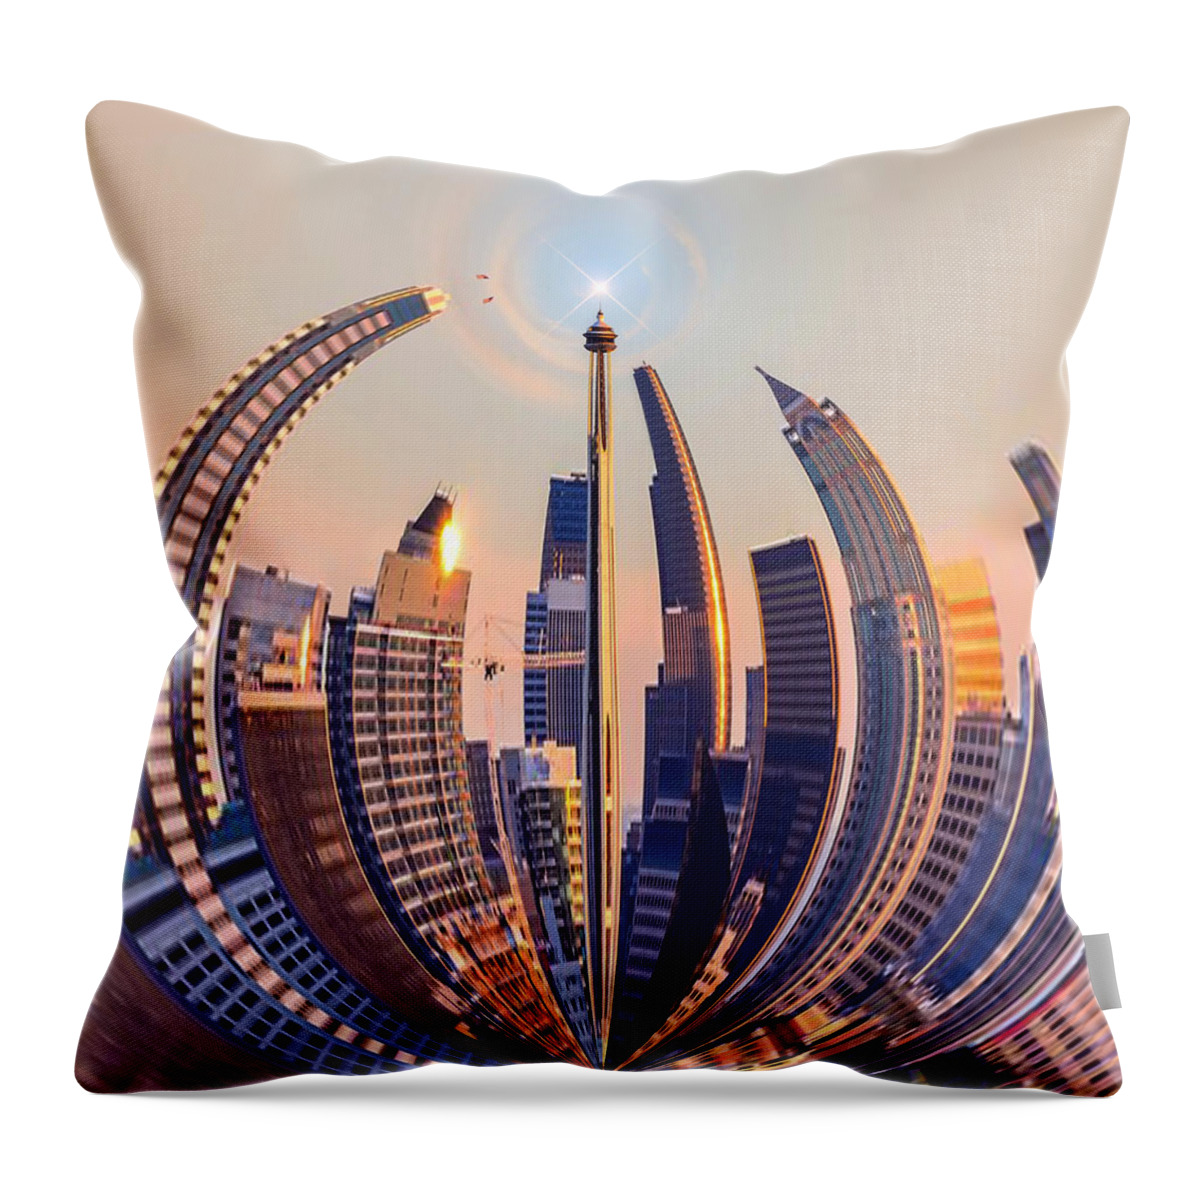 Seattle Throw Pillow featuring the digital art Round the City by Paisley O'Farrell